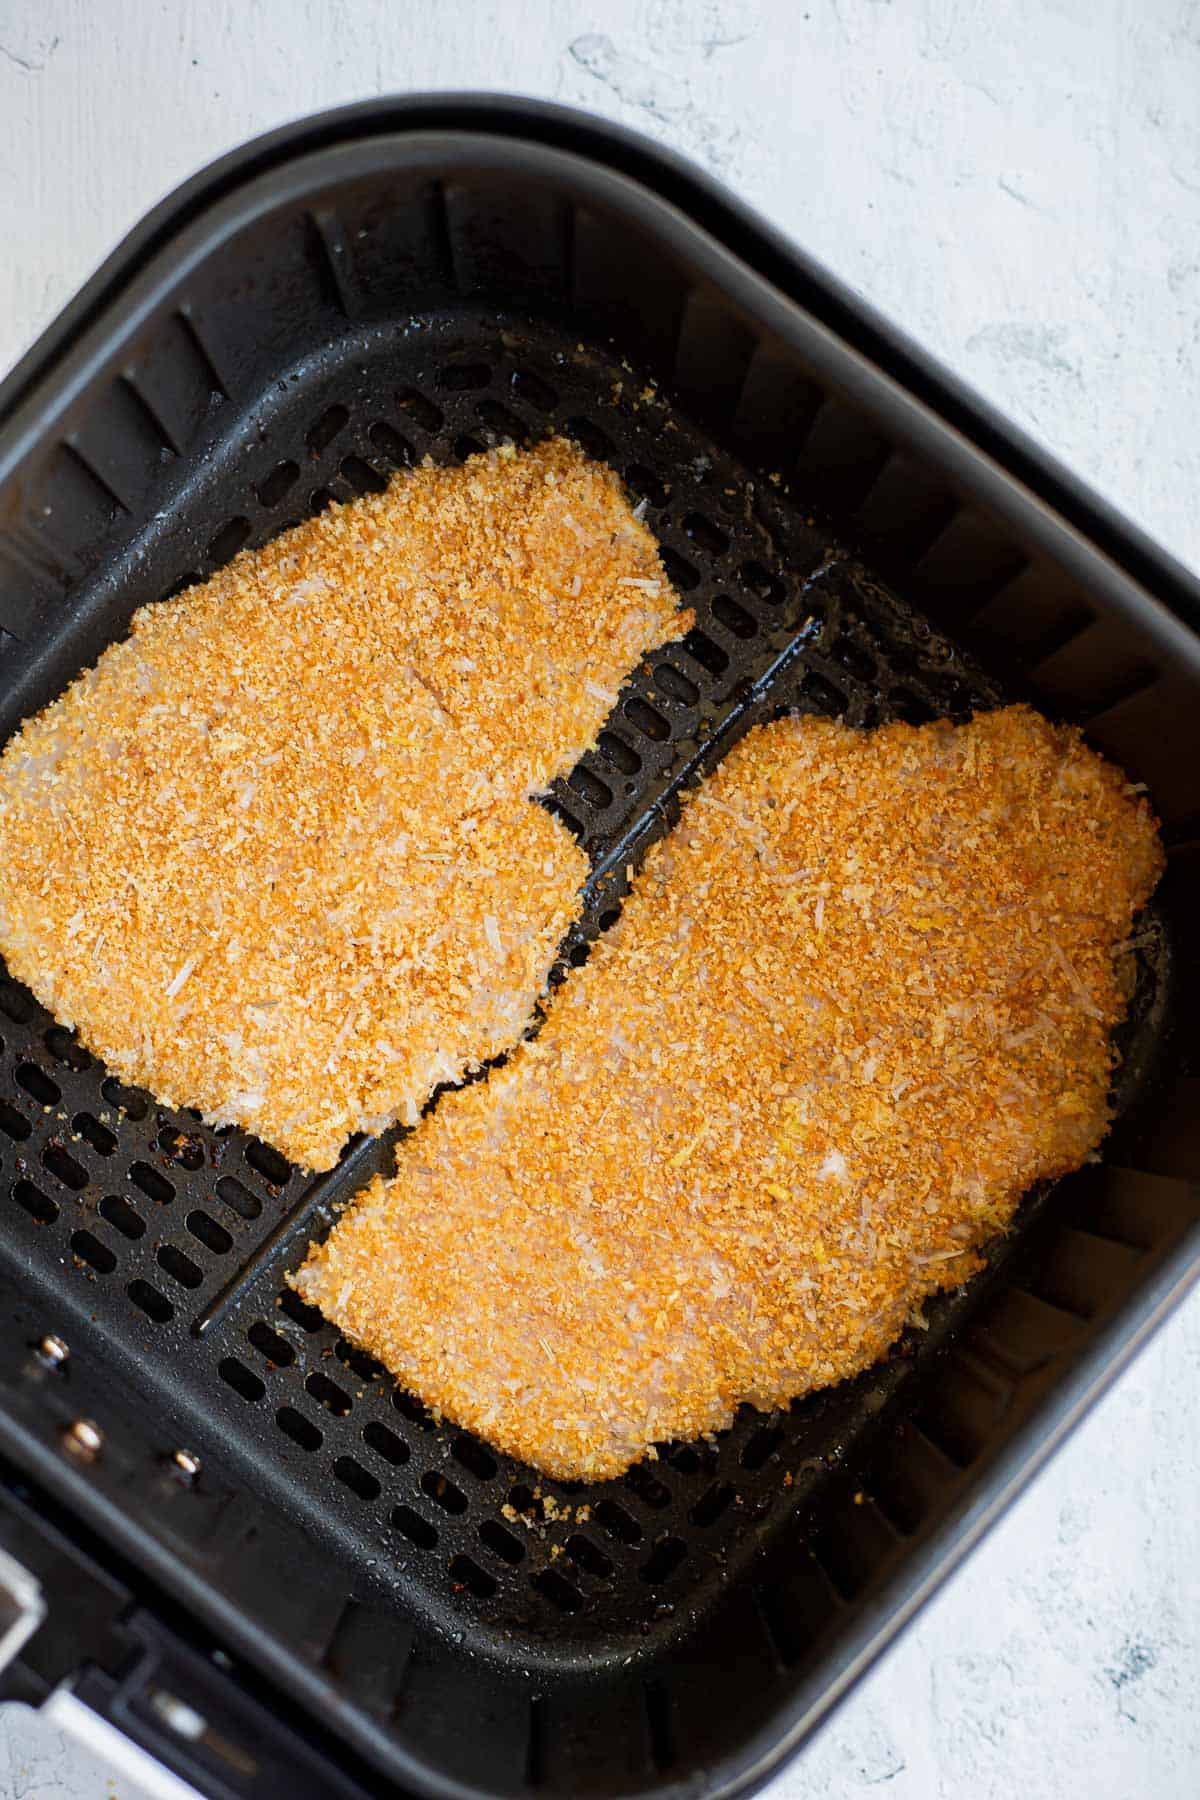 2 pieces of breaded chicken in the air fryer basket.